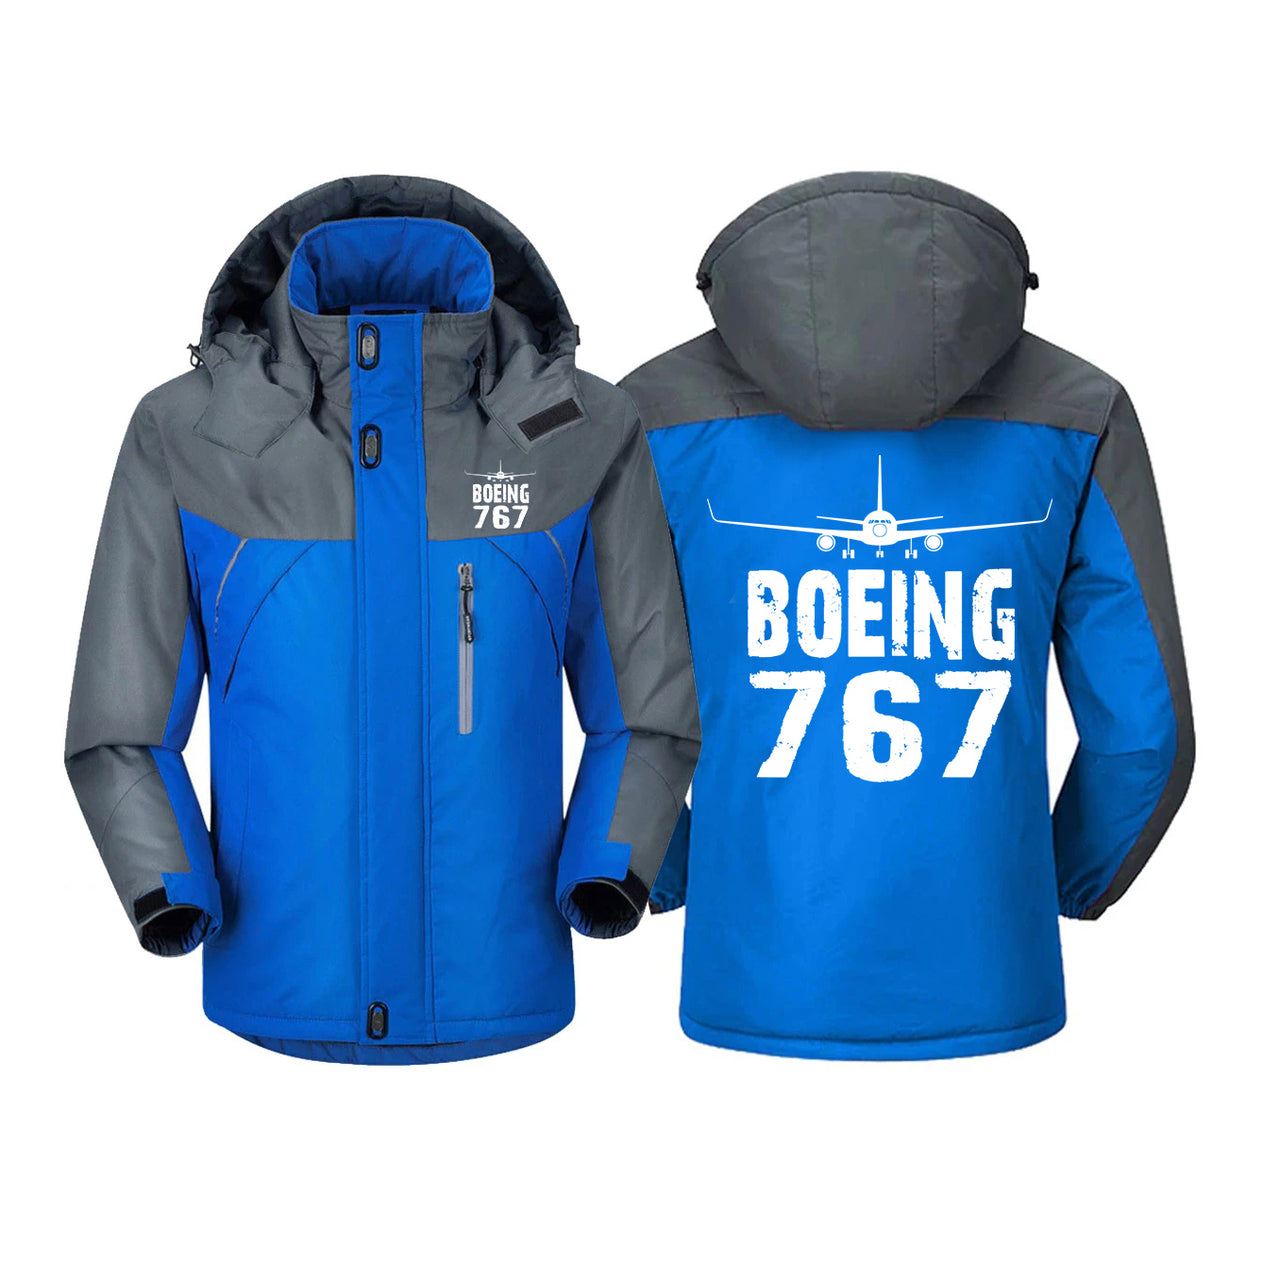 Boeing 767 & Plane Designed Thick Winter Jackets